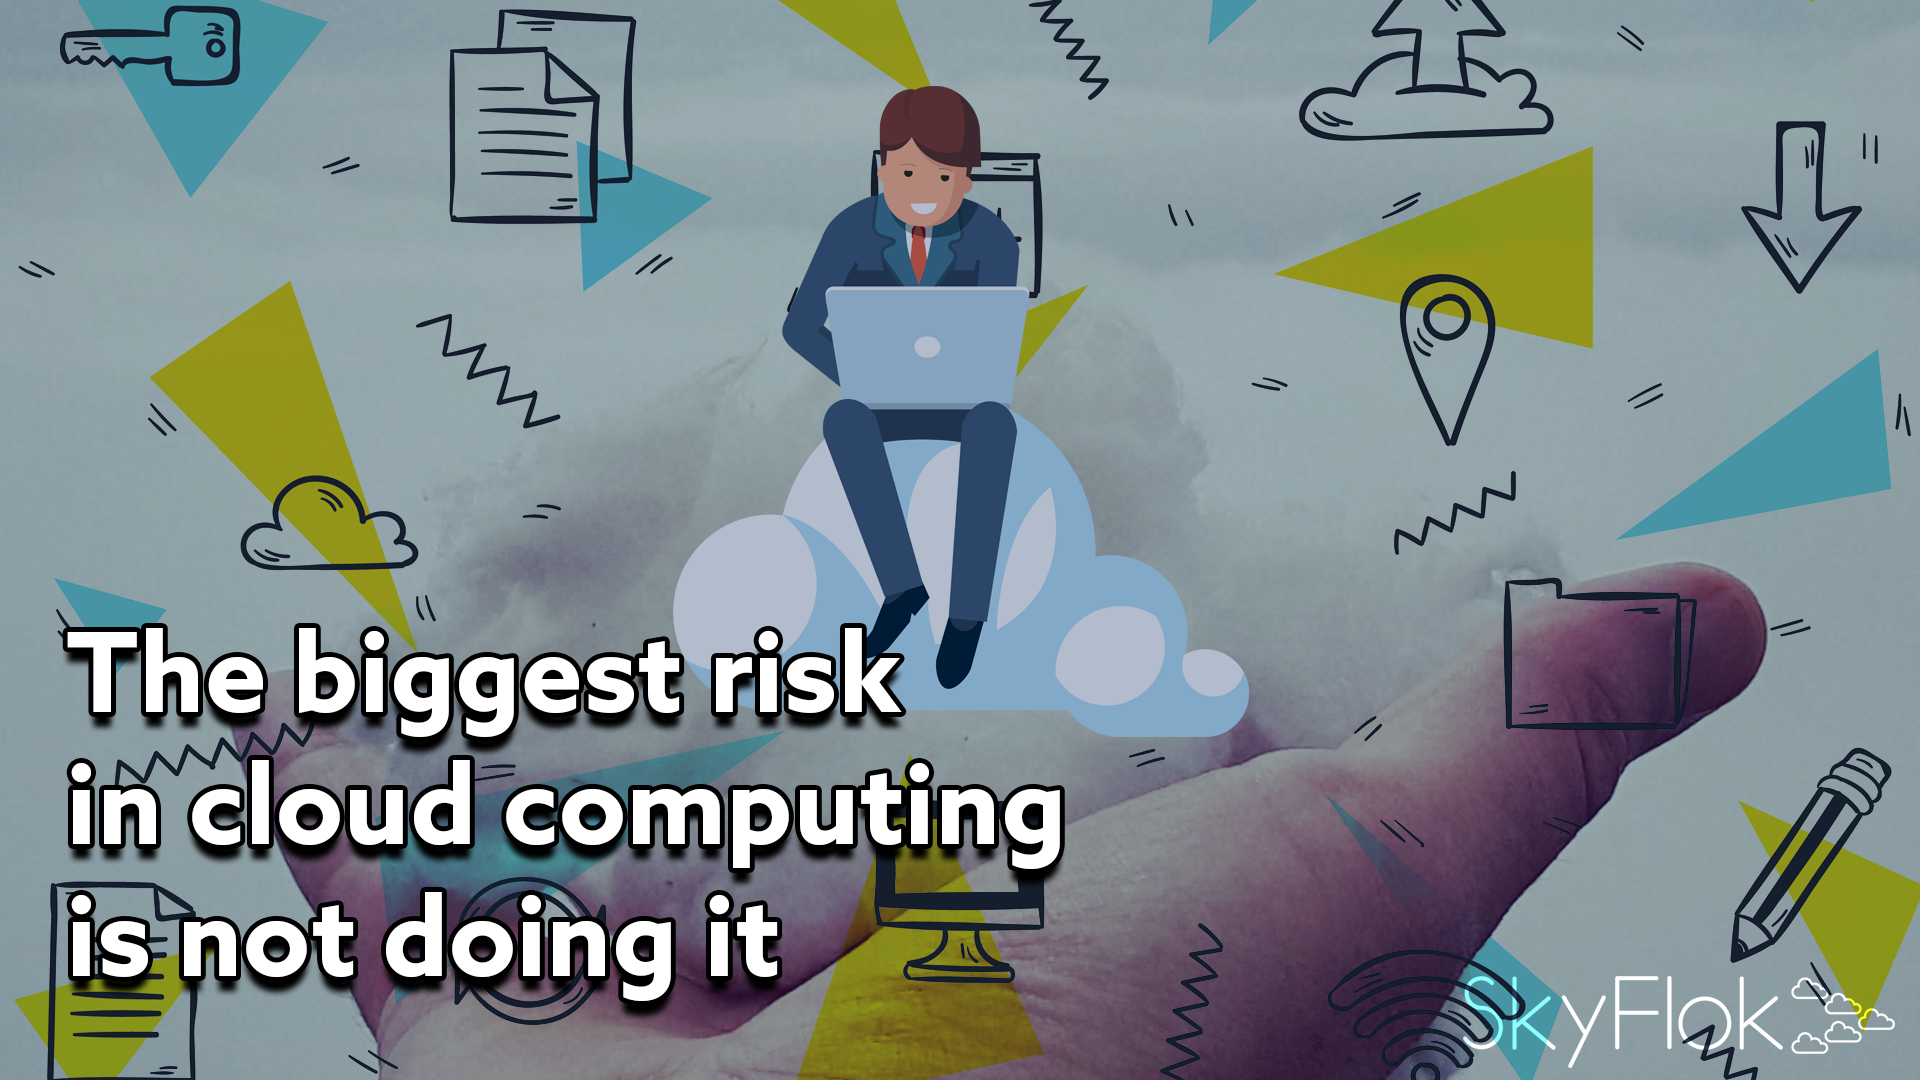 The biggest risk in cloud computing is not doing it